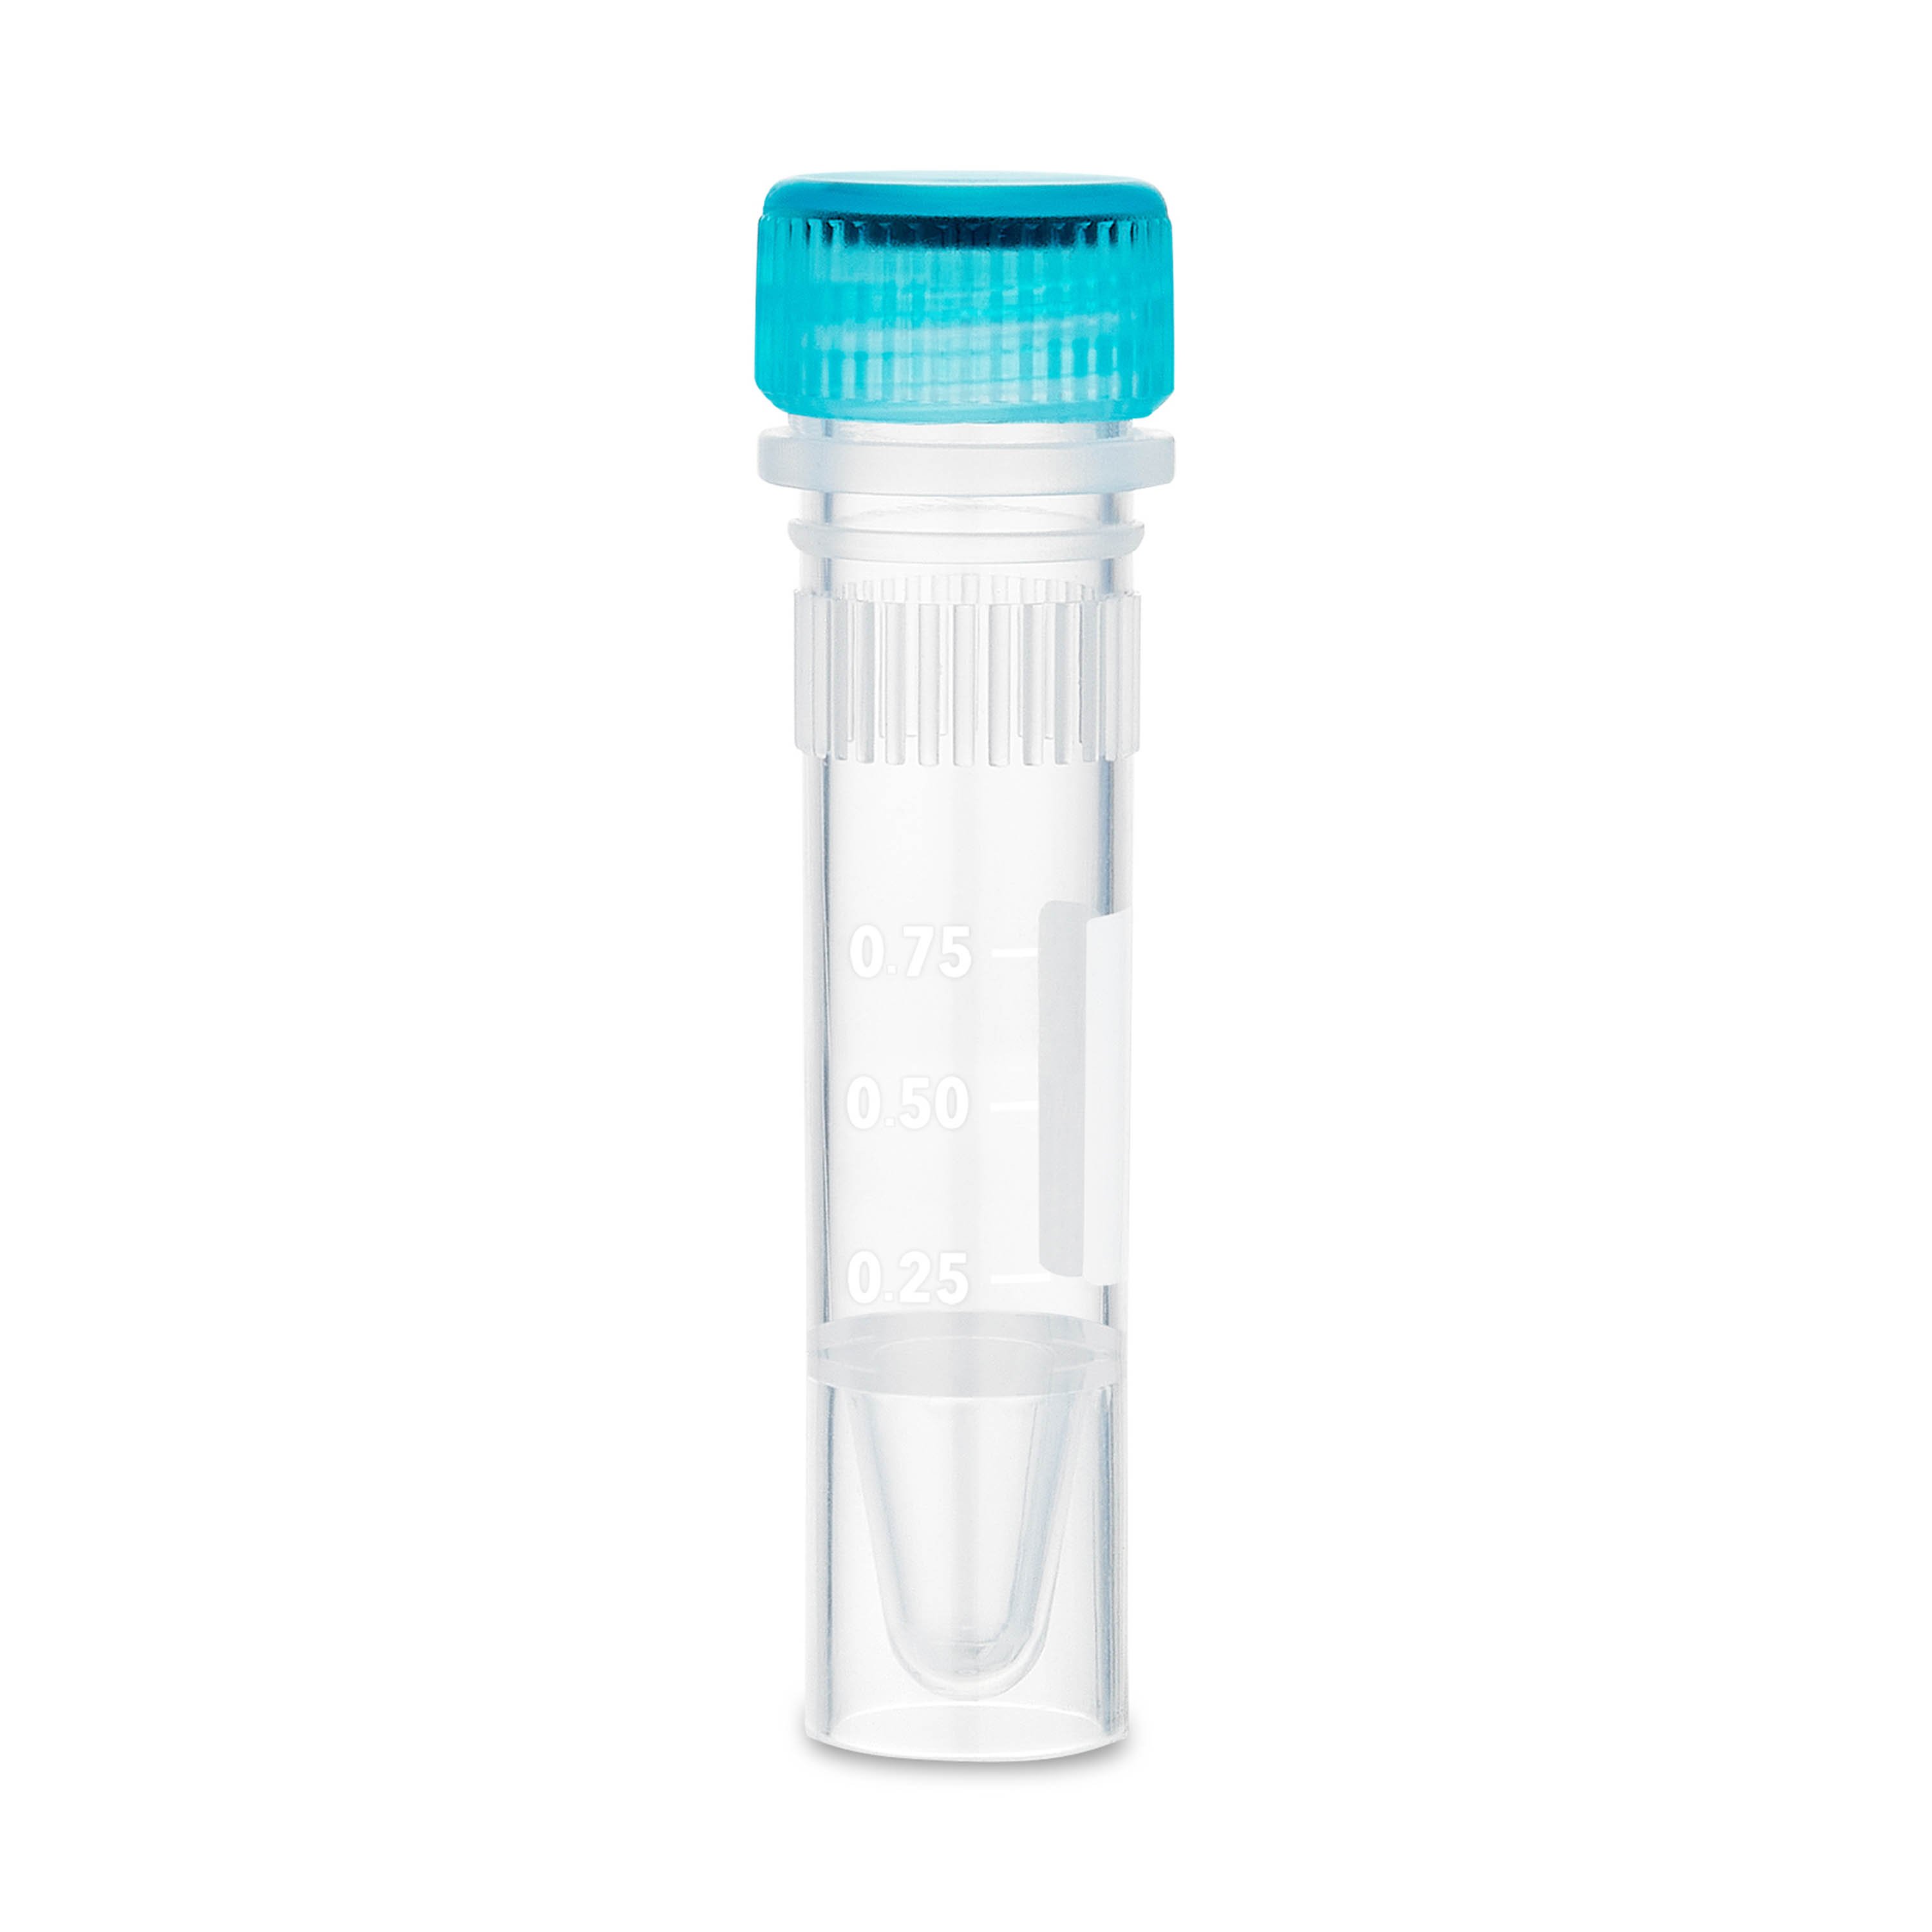 ClearSeal 1.5mL Sterile Screw Cap Microcentrifuge Tube with O-Ring, Attached Cap, Self-Standing, Printed Graduations